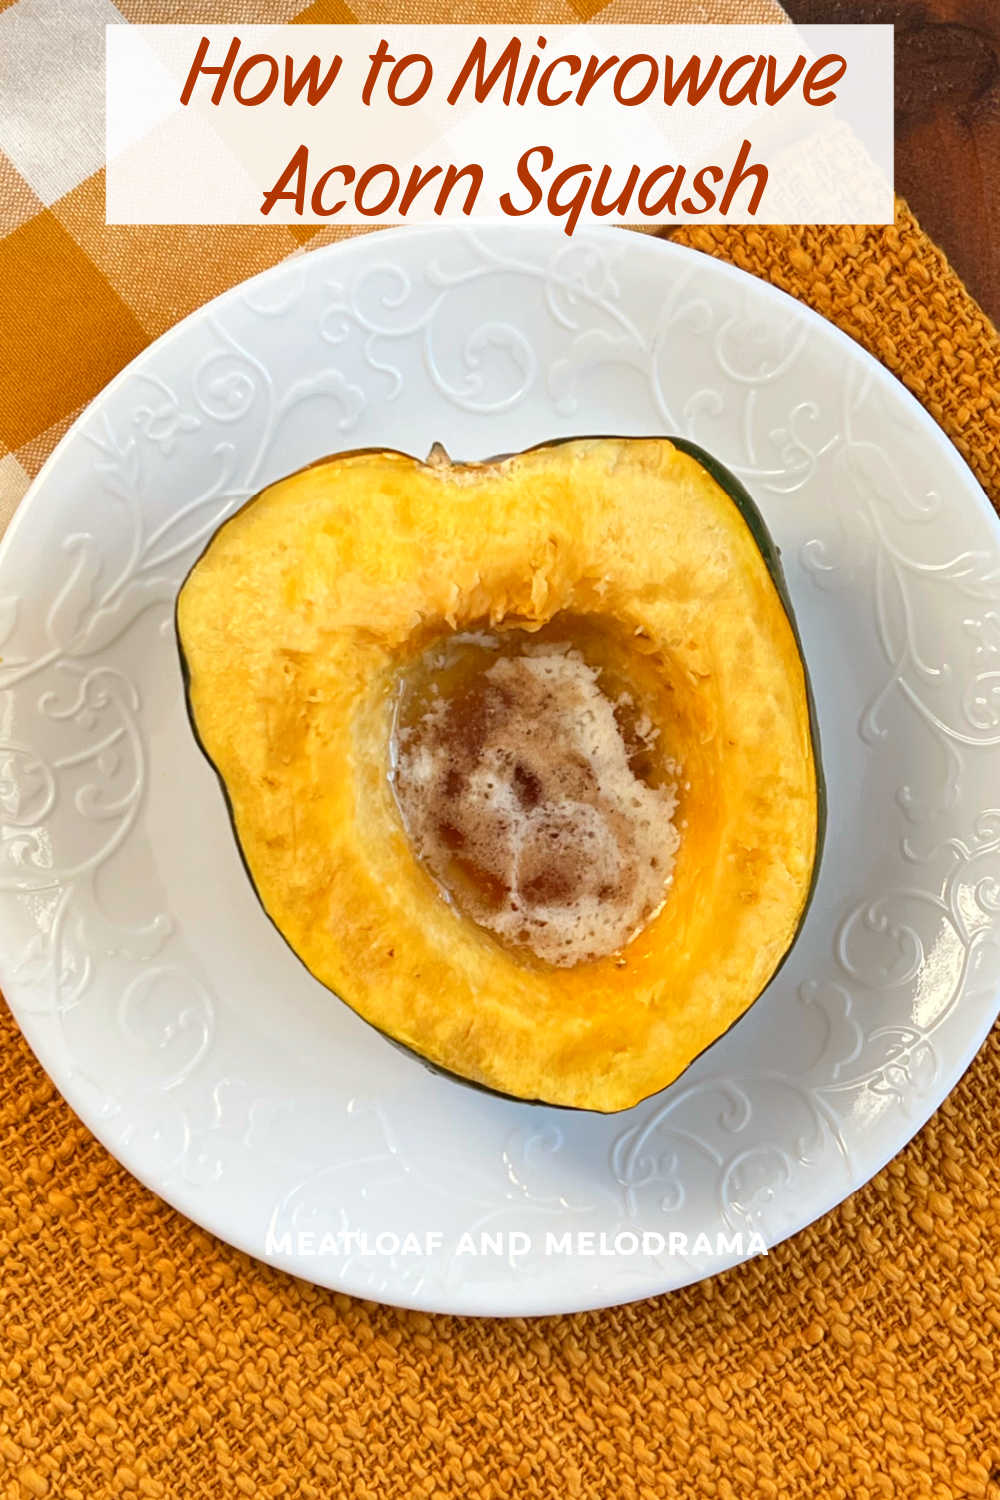 Learn how to microwave acorn squash for a quick and easy side dish for fall and Thanksgiving. This is the easiest way to cook acorn squash and turns out perfect every time.  via @meamel